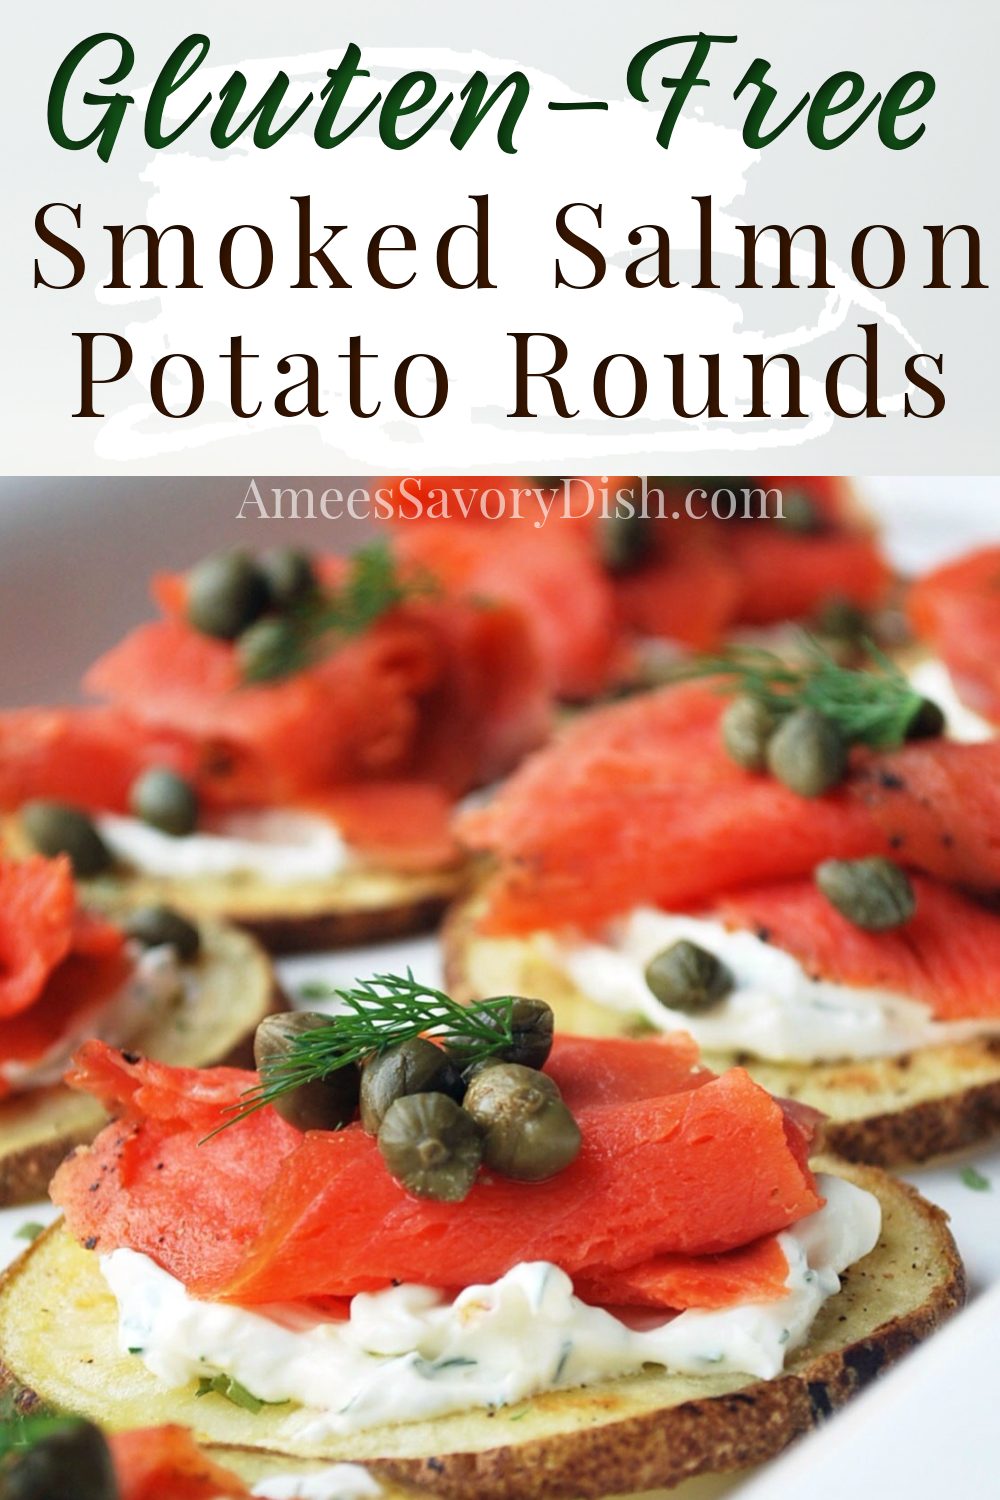 This delicious appetizer recipe is a twist on potato skins made with thinly sliced roasted potato slices topped with a creamy yogurt chive sauce, wild-caught smoked salmon, and capers.  These potato rounds are a perfect healthy Superbowl appetizer or elegant, bite-sized, snack for your next gathering.  #smokedsalmon #salmonappetizer #glutenfreeappetizers #glutenfreepartyfood #glutenfreerecipe #potatorecipe #potatoskins #smokedsalmon #glutenfree via @Ameessavorydish